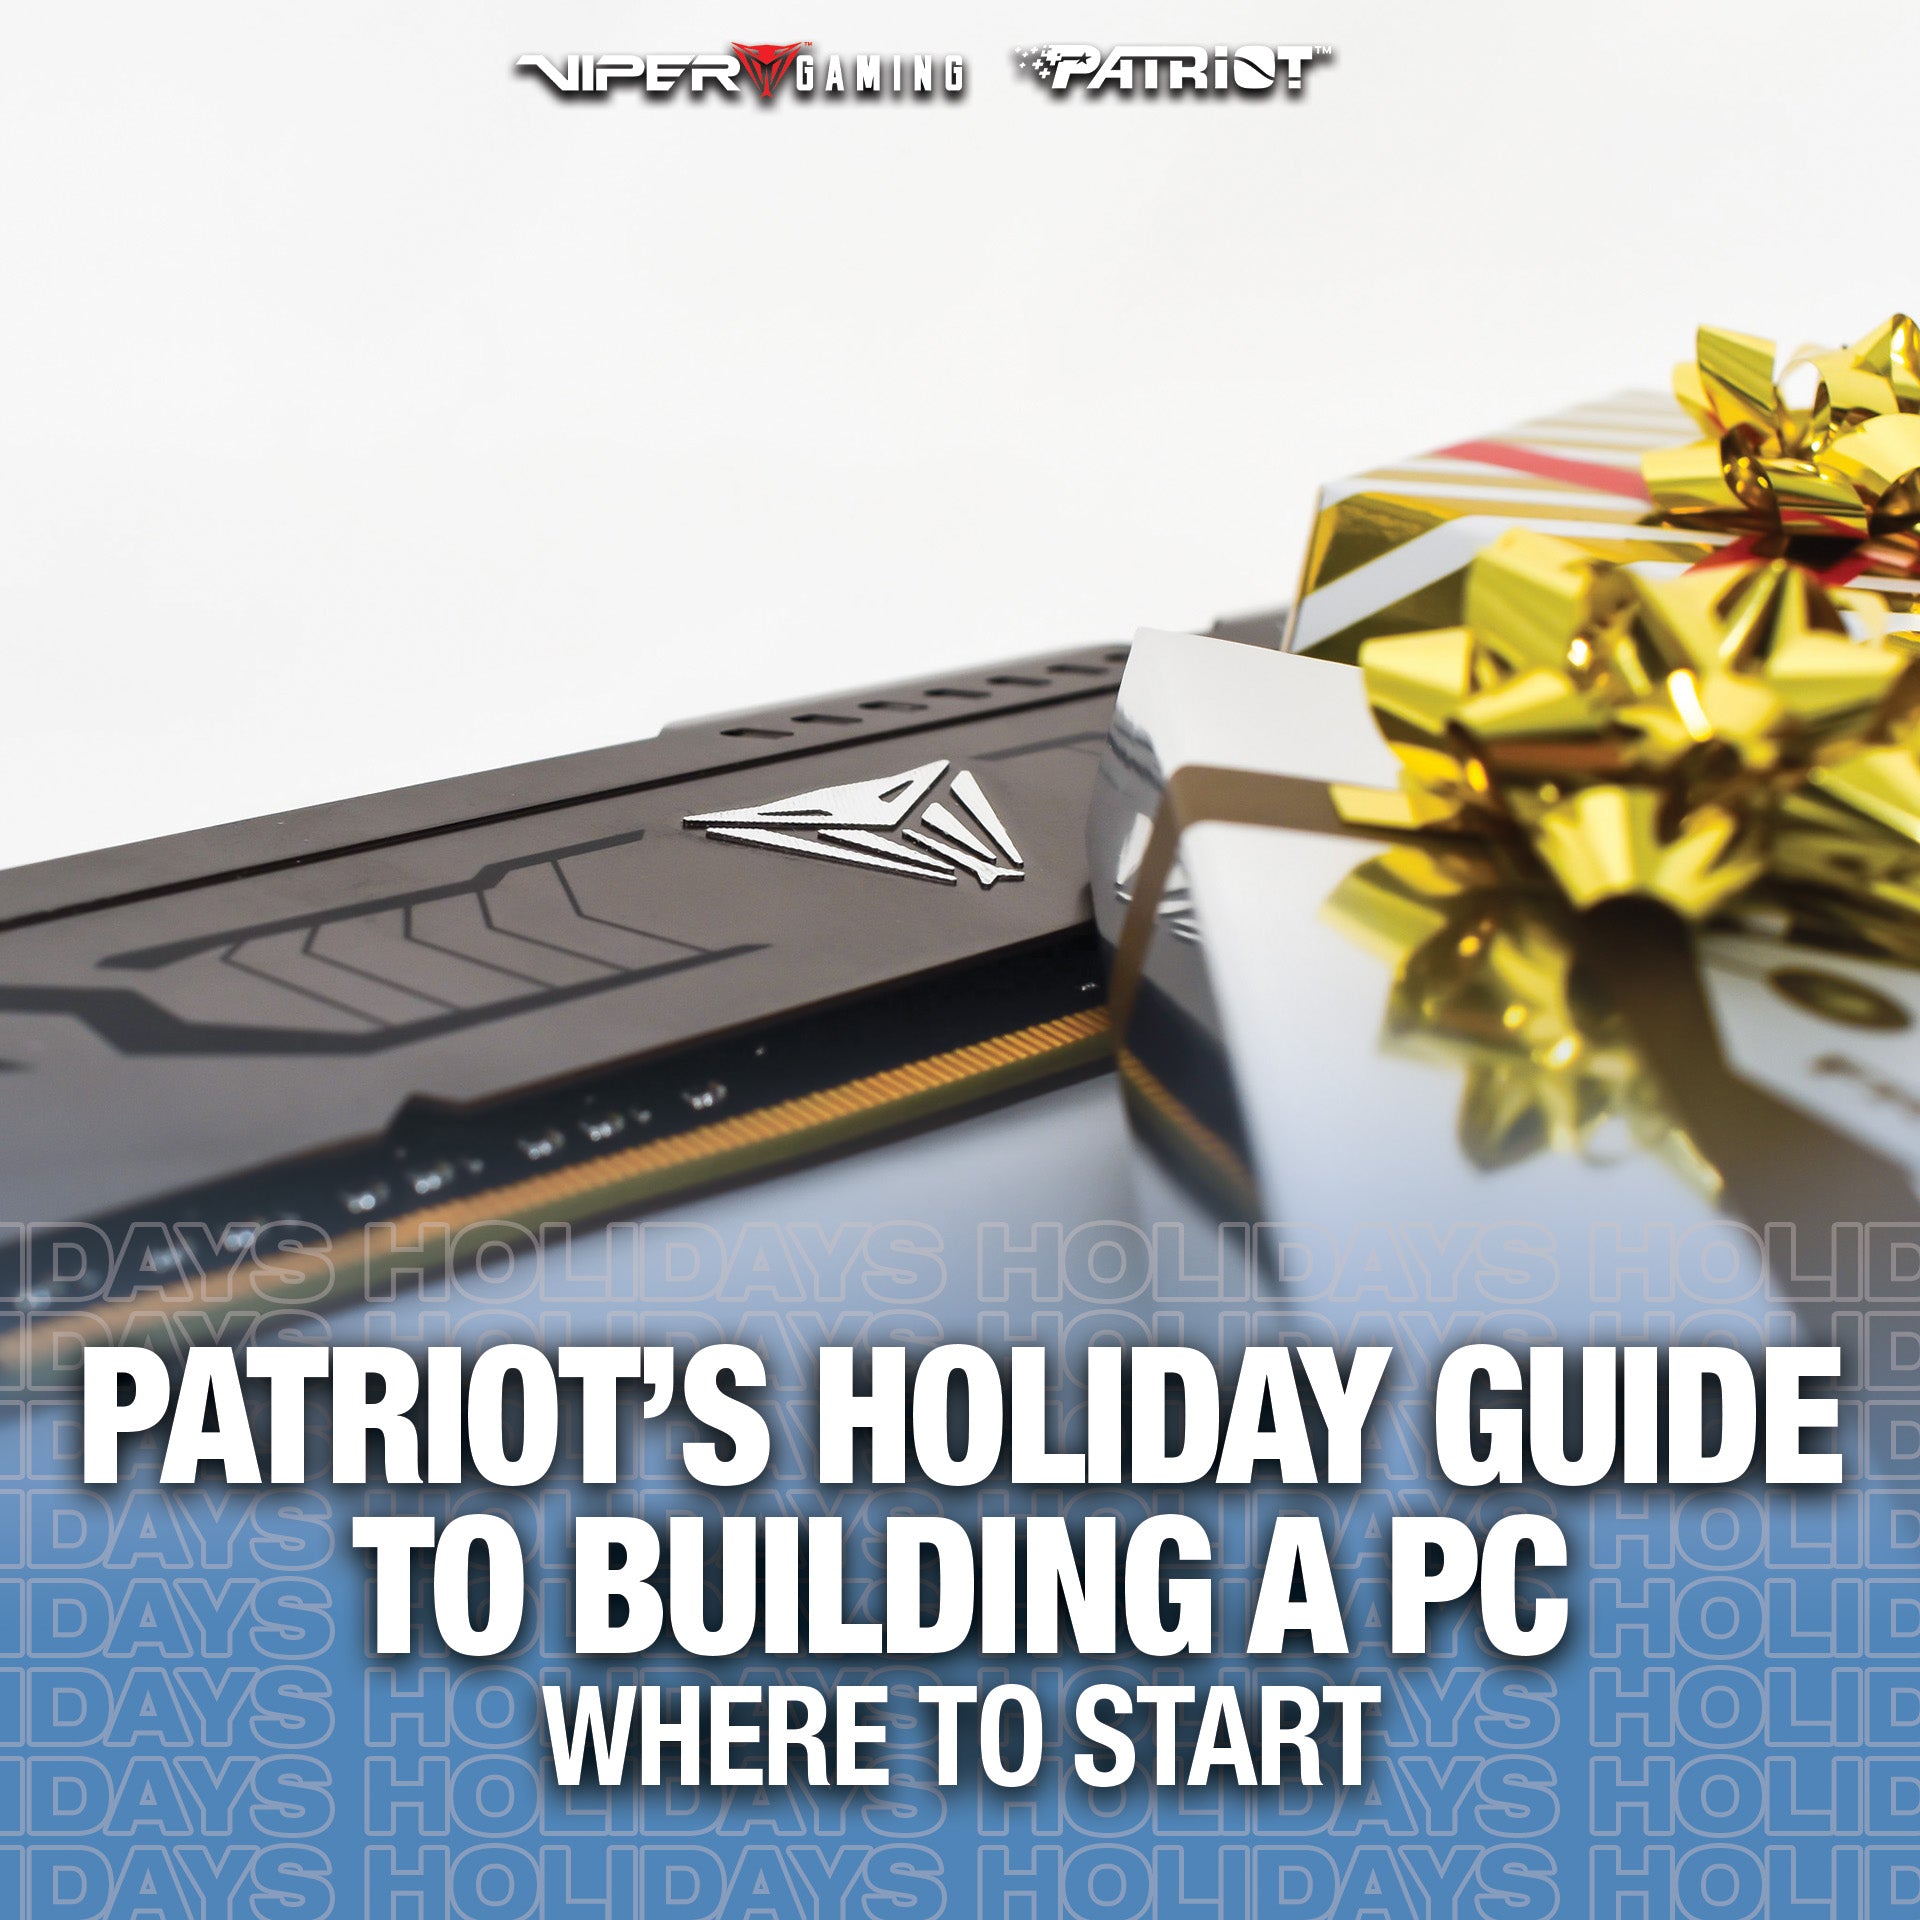 Patriot's Holiday Guide to Building a PC